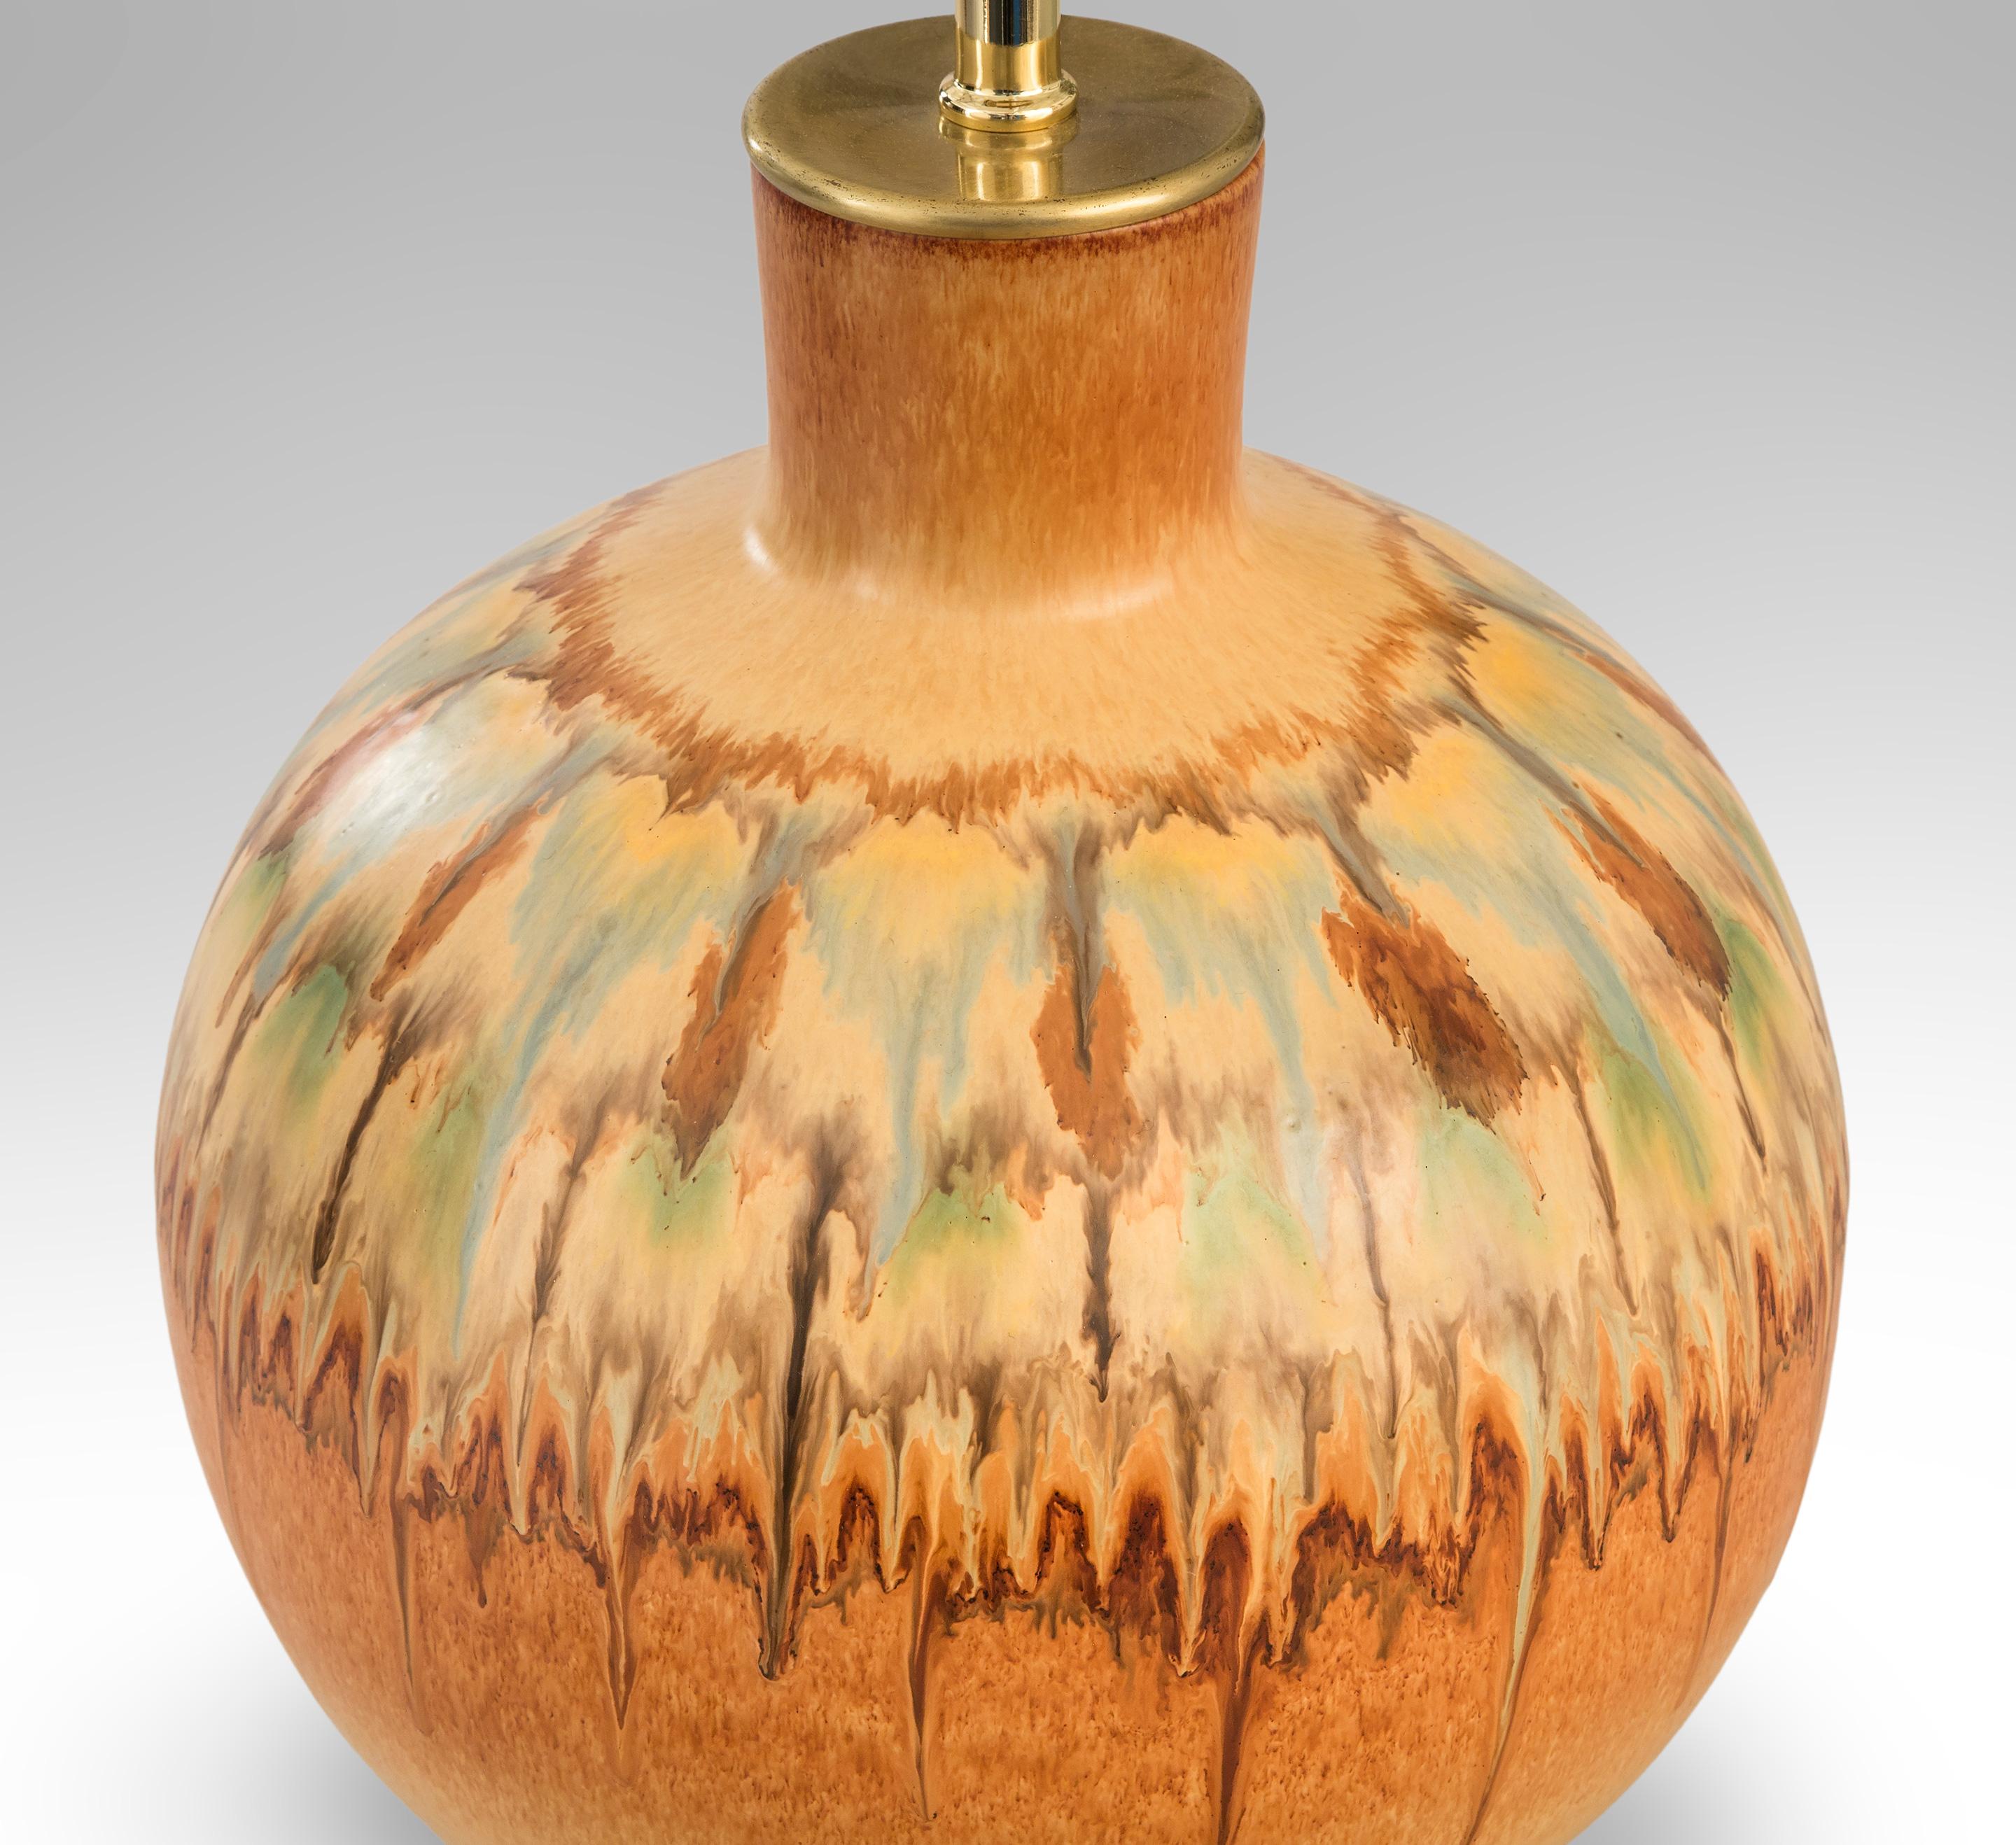 An Italian ceramic lamp by Bertoncello,
circa 1970
A lamp of elegant form with vibrant color and pattern and a stunning drip glaze. The cylindrical neck above a perfect sphere glazed with abstract bands of color and pattern.
Great condition,